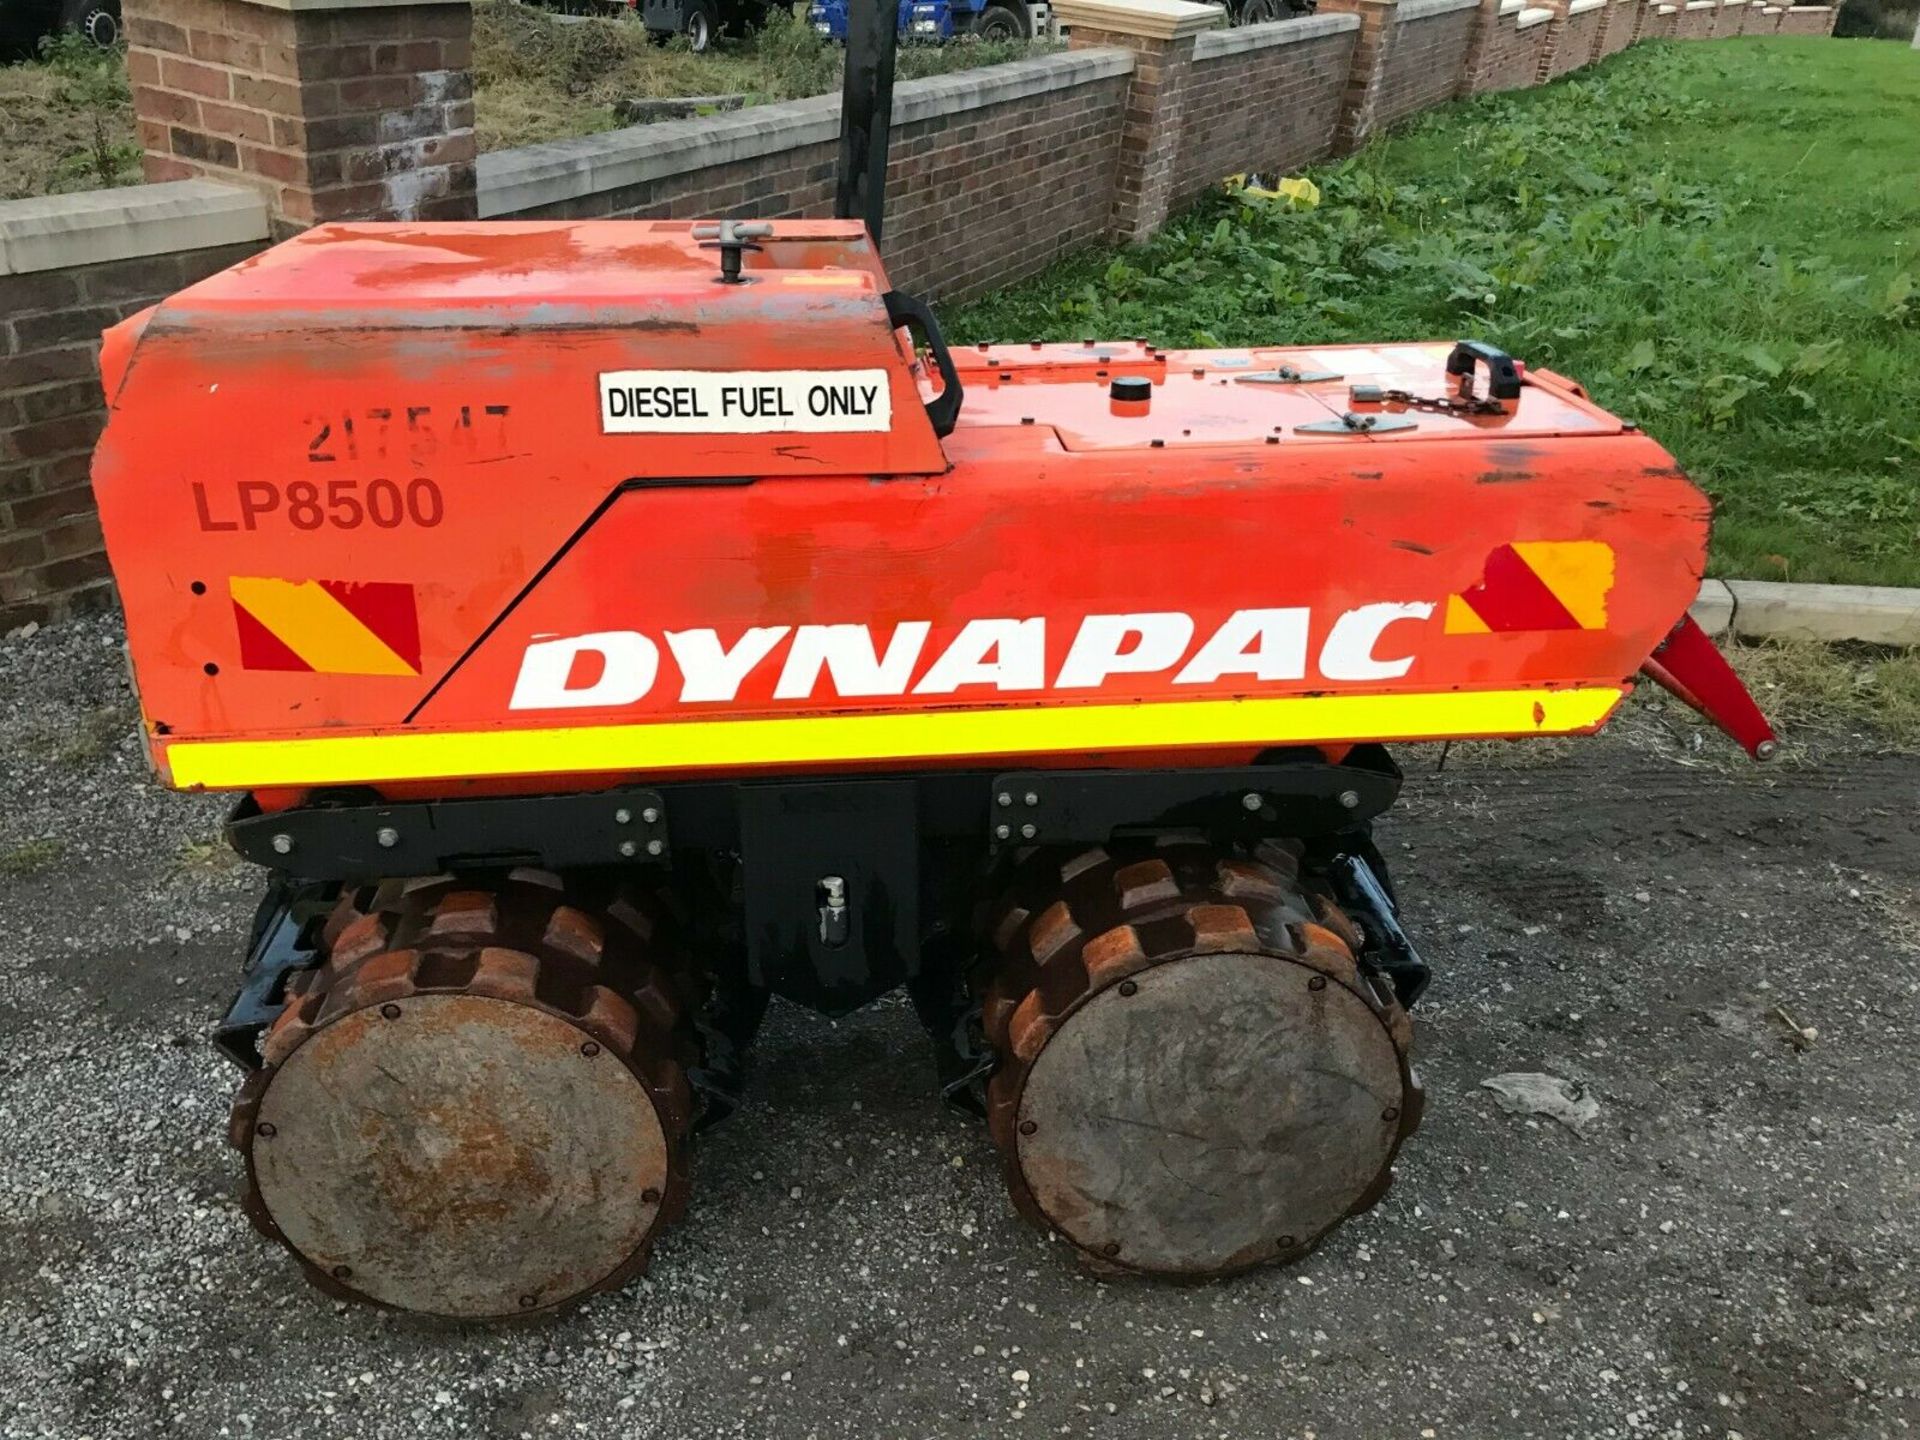 Dynapac Lp8500 Compact Trench Roller - Image 8 of 9